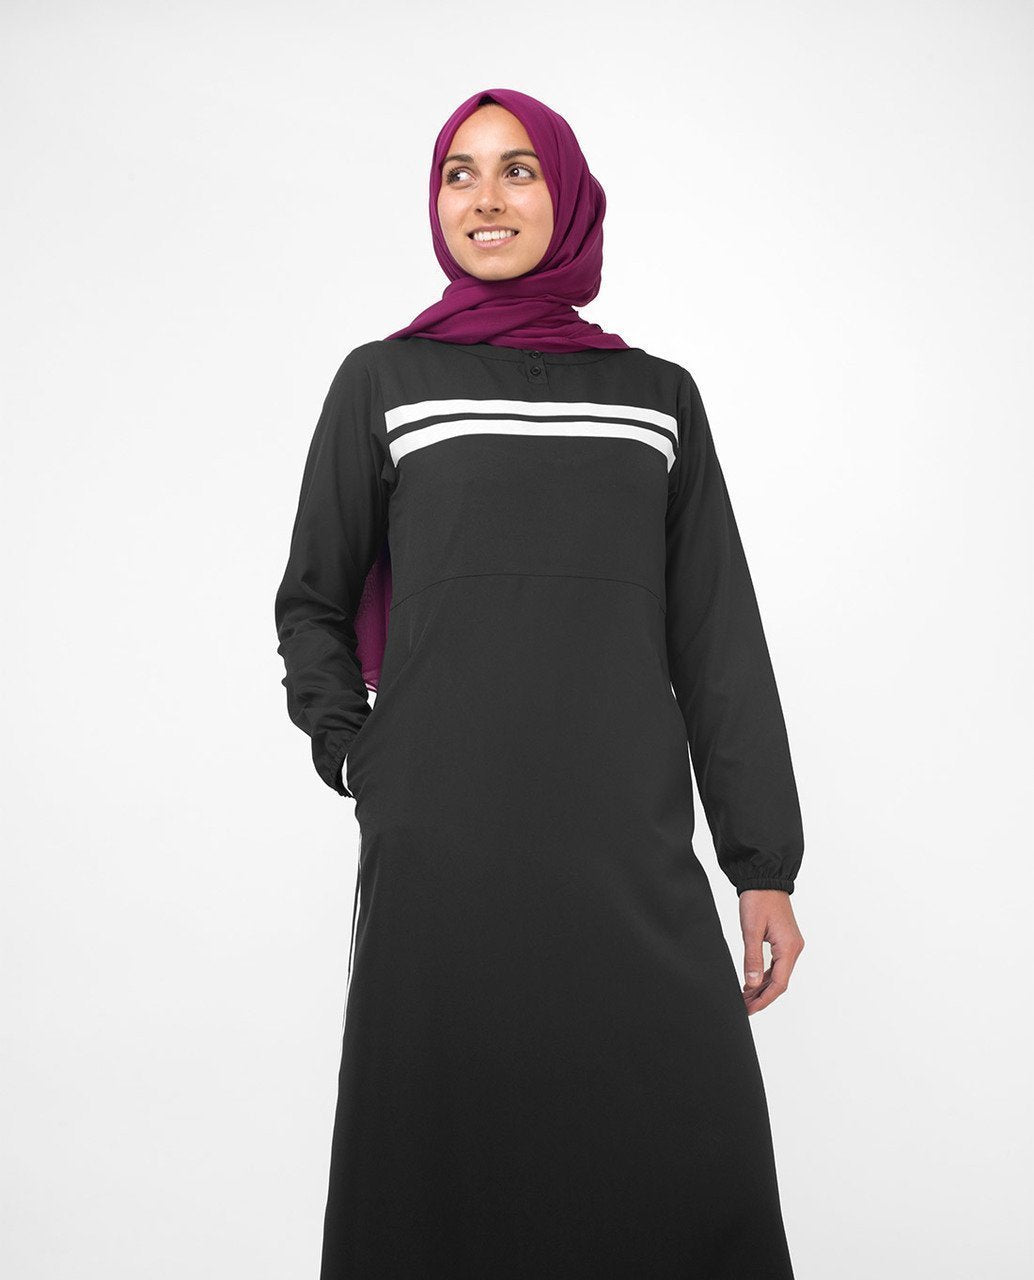 Abaya Neck Placket Open Black in Classic Style - ModestPath.com